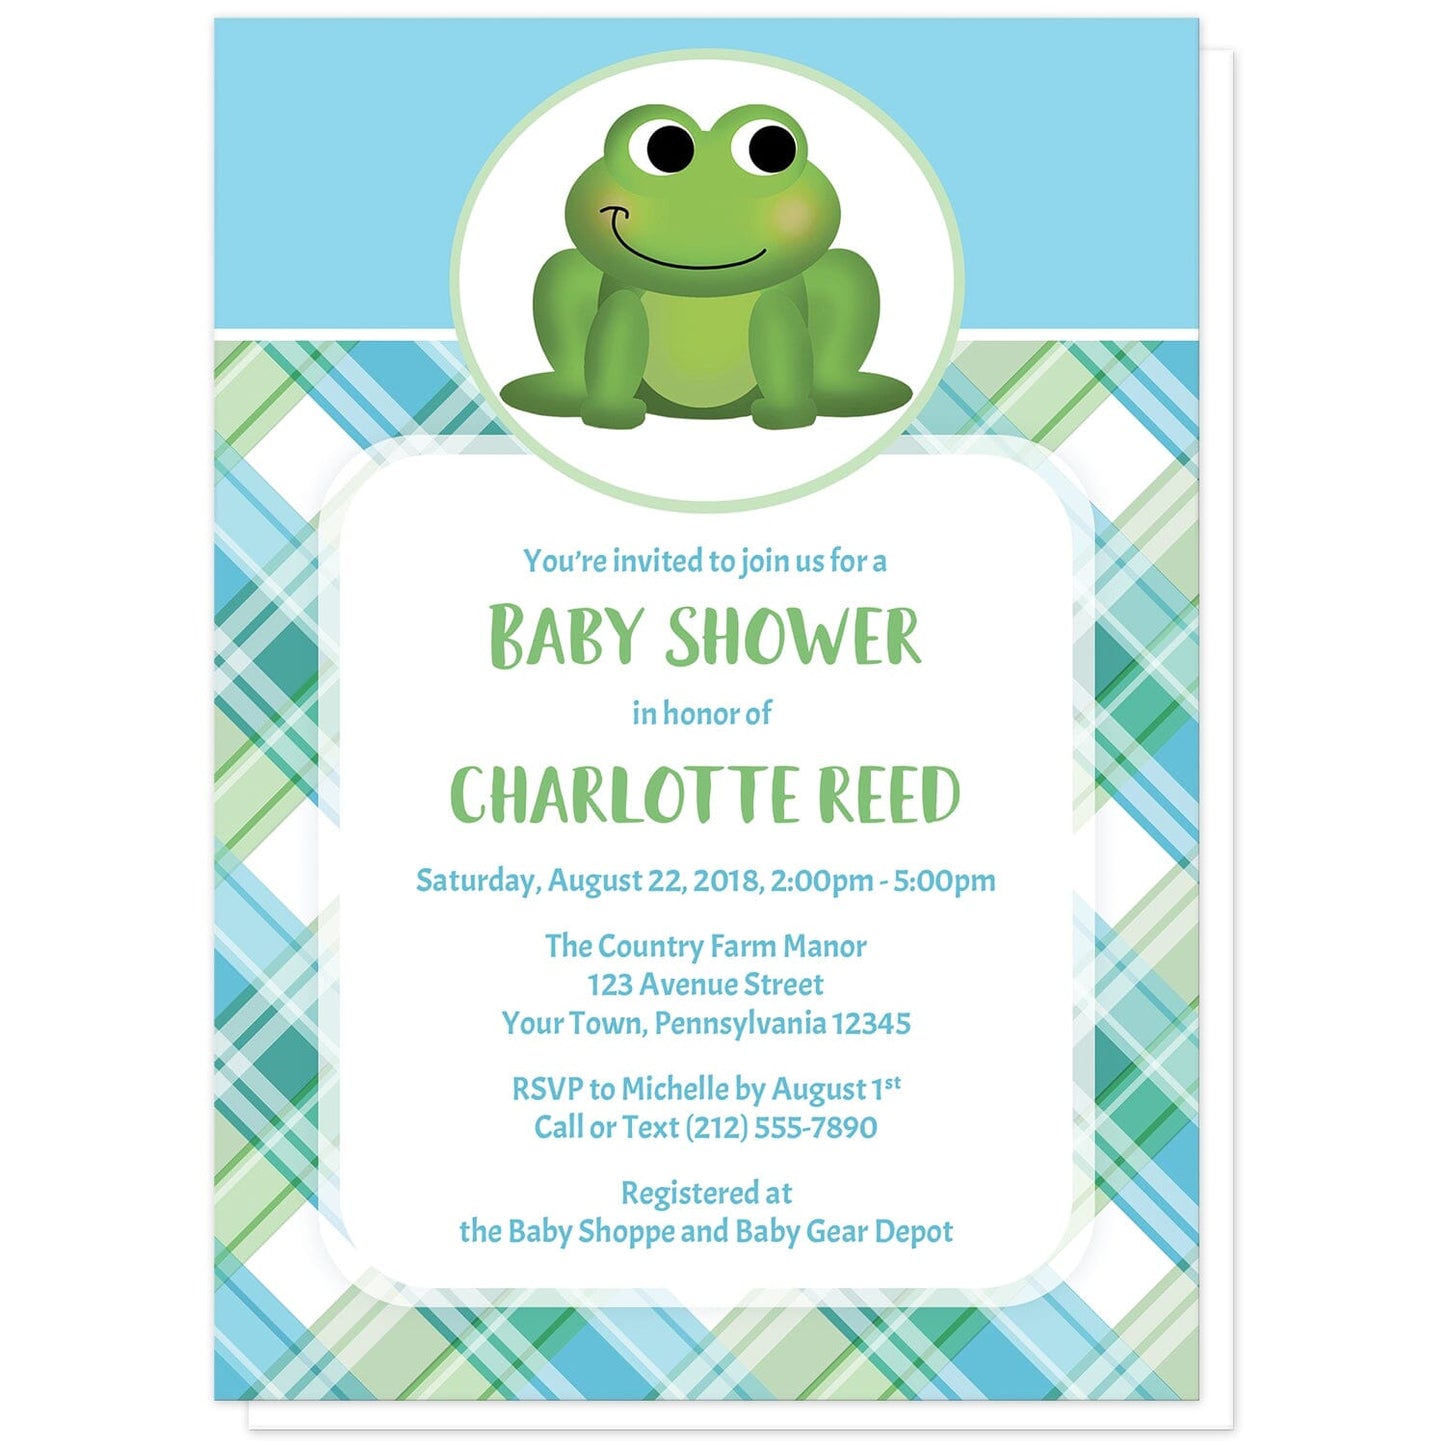 Cute Frog Green and Blue Plaid Baby Shower Invitations at Artistically Invited. Cute frog green and blue plaid baby shower invitations that are illustrated with an adorable green frog in a white and green oval over a blue background on the top, and a green and blue plaid pattern background on the bottom. Your personalized baby shower details are custom printed in green and blue over a white rectangular area over the plaid pattern.